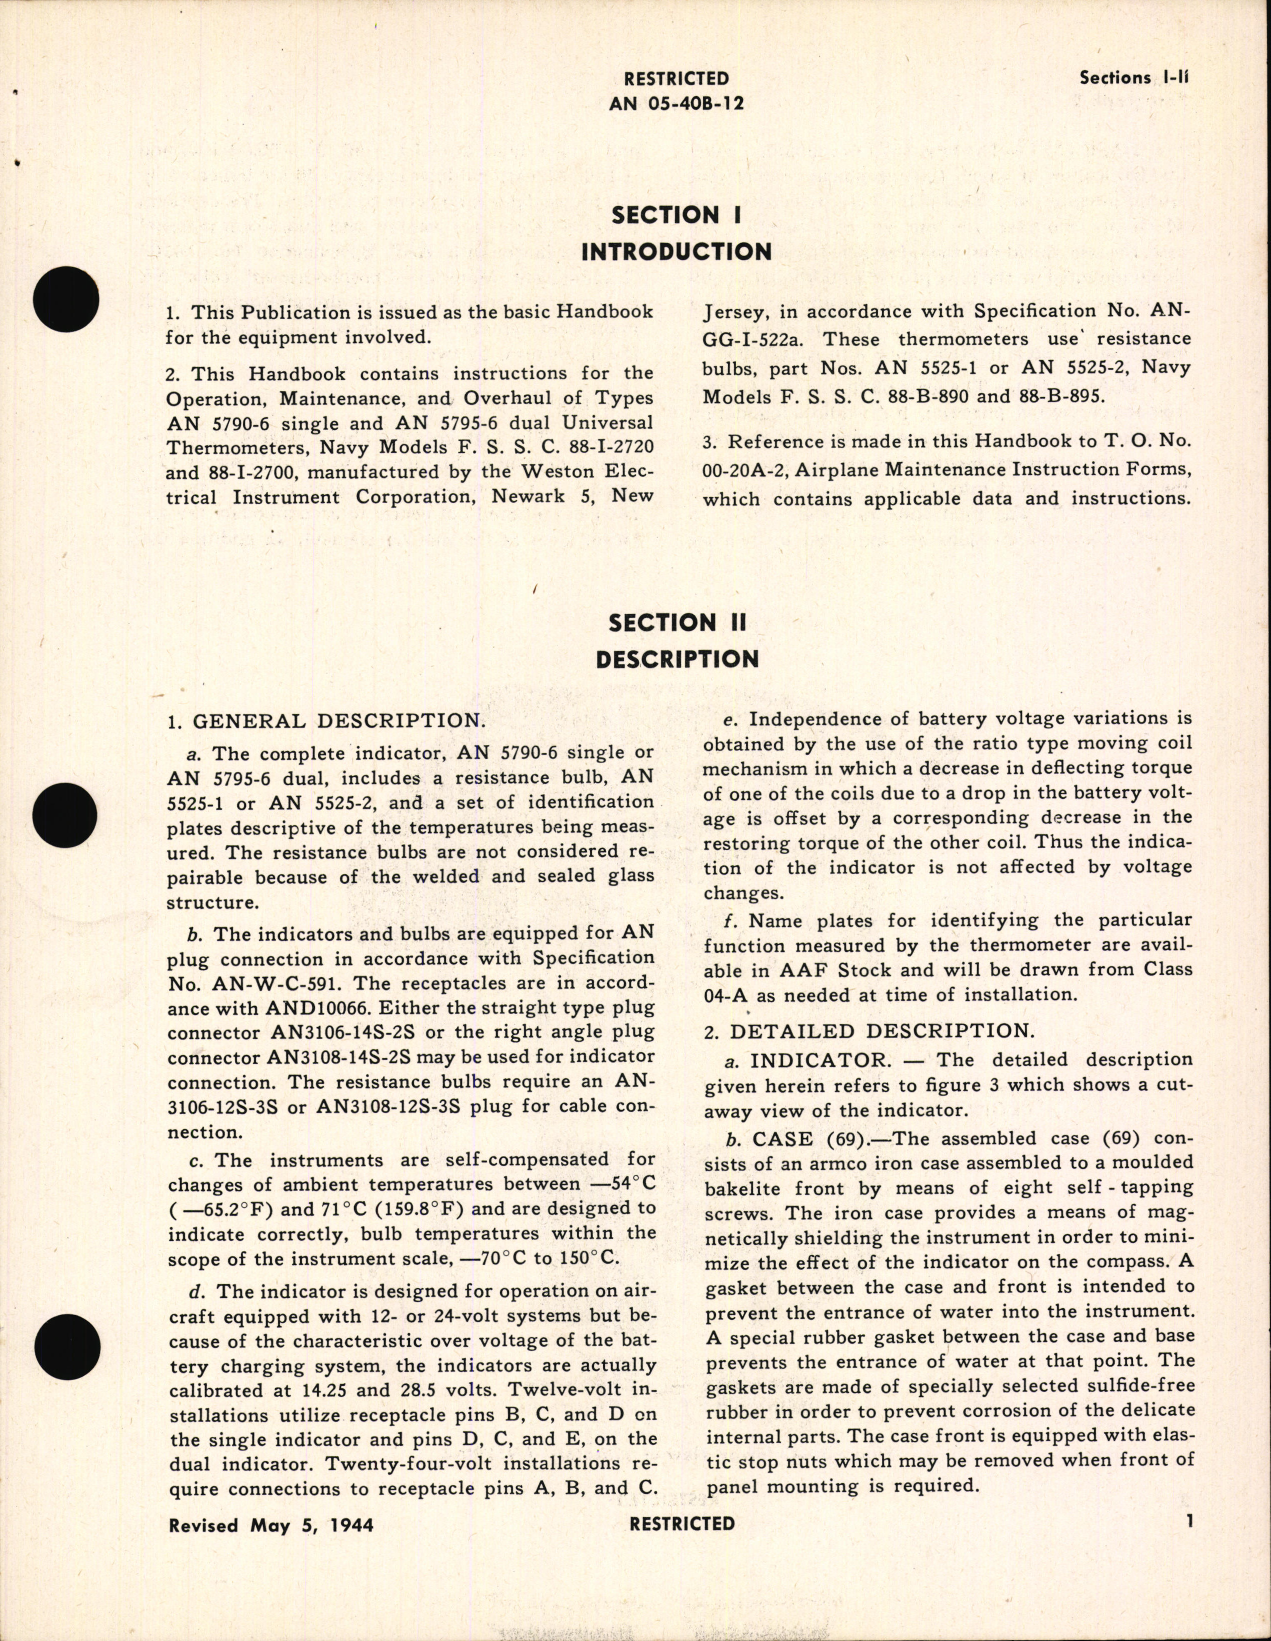 Sample page 7 from AirCorps Library document: Handbook of Instructions with Parts Catalog for Thermometer Indicators